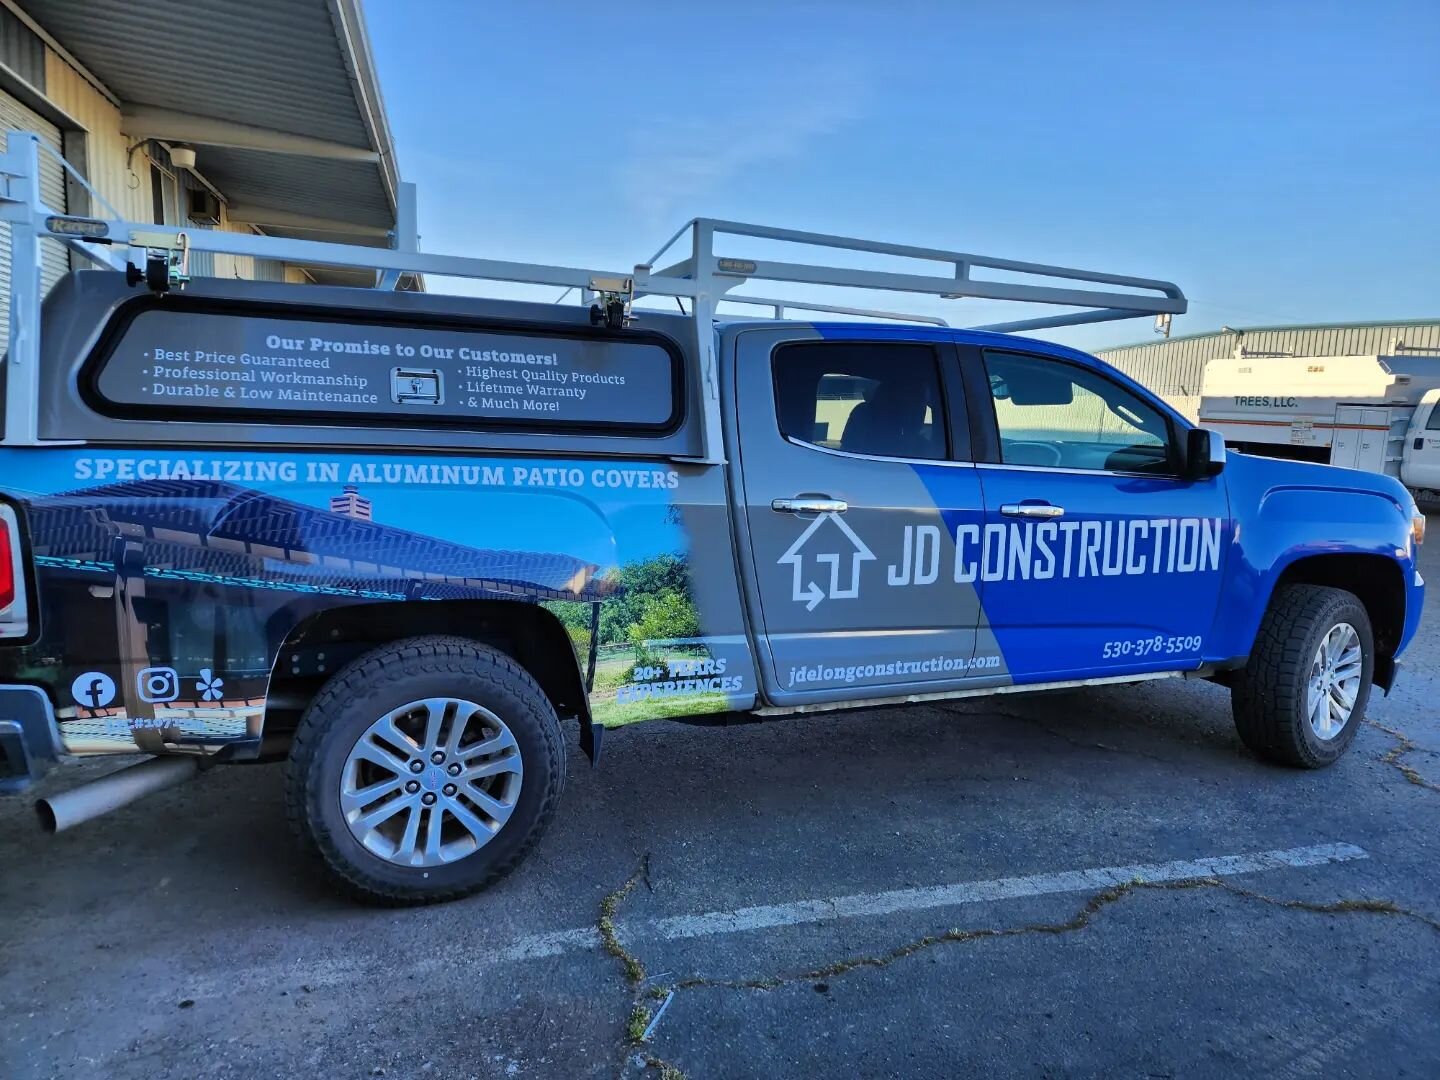 Shout out to @signaramaredding for creating our mobile billboard! Looks awesome. We are beyond happy with the customer service, the design and delivery🙂 #jdconstructionredding #reddingaluminumpatiocovers